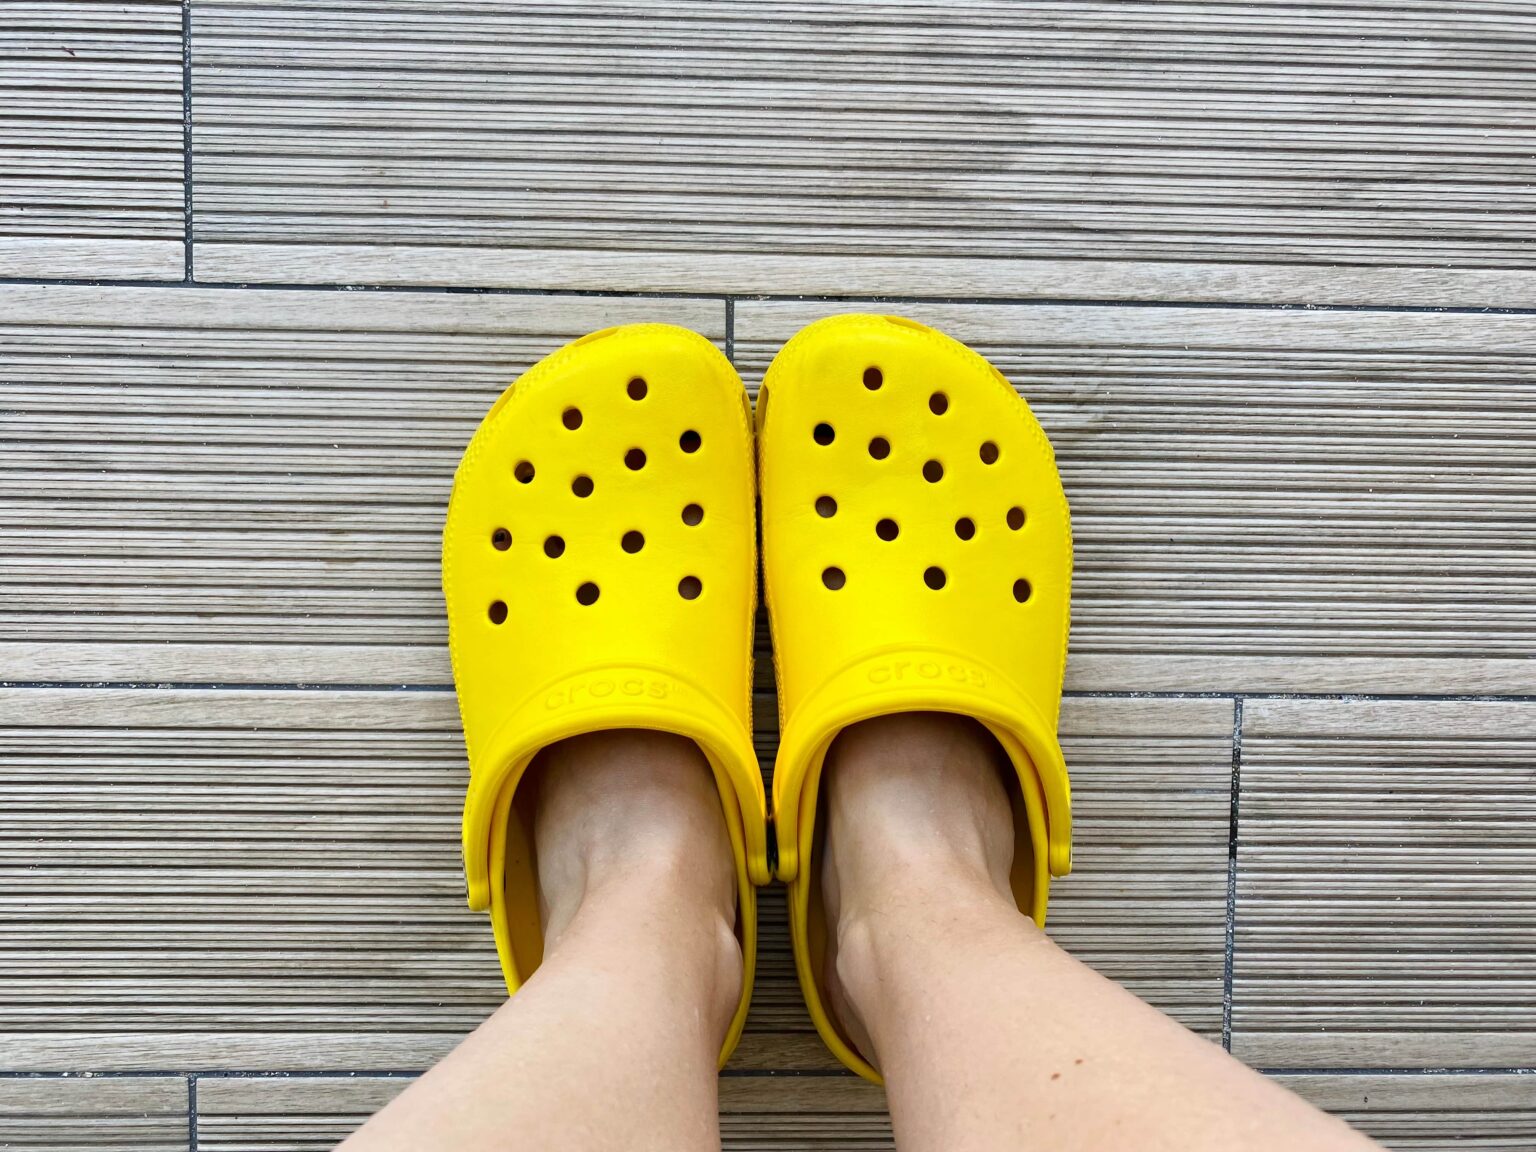 Get the best shoes for traveling. Crocs is a well-known brand for stylish and comfortable shoes.